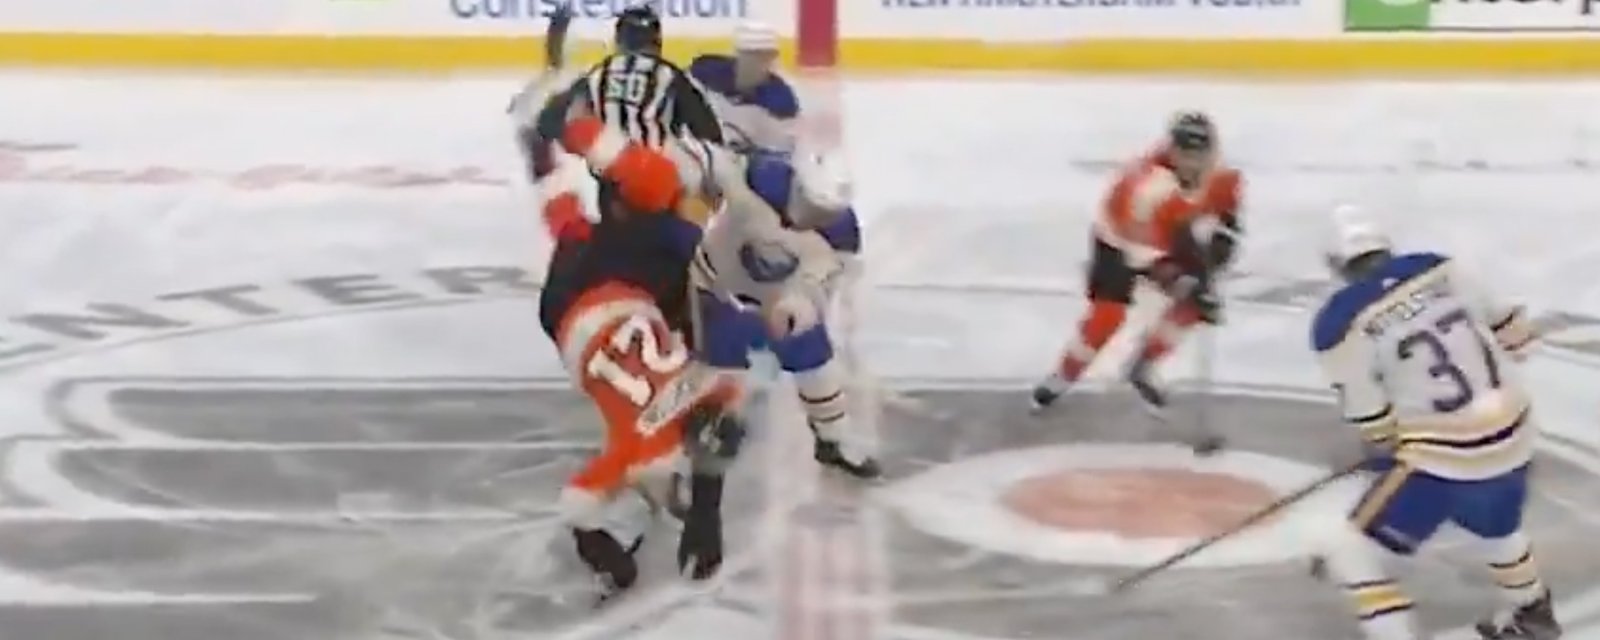 Lazar judo-flips Laughton on the face-off and referees stun everyone with non-call 